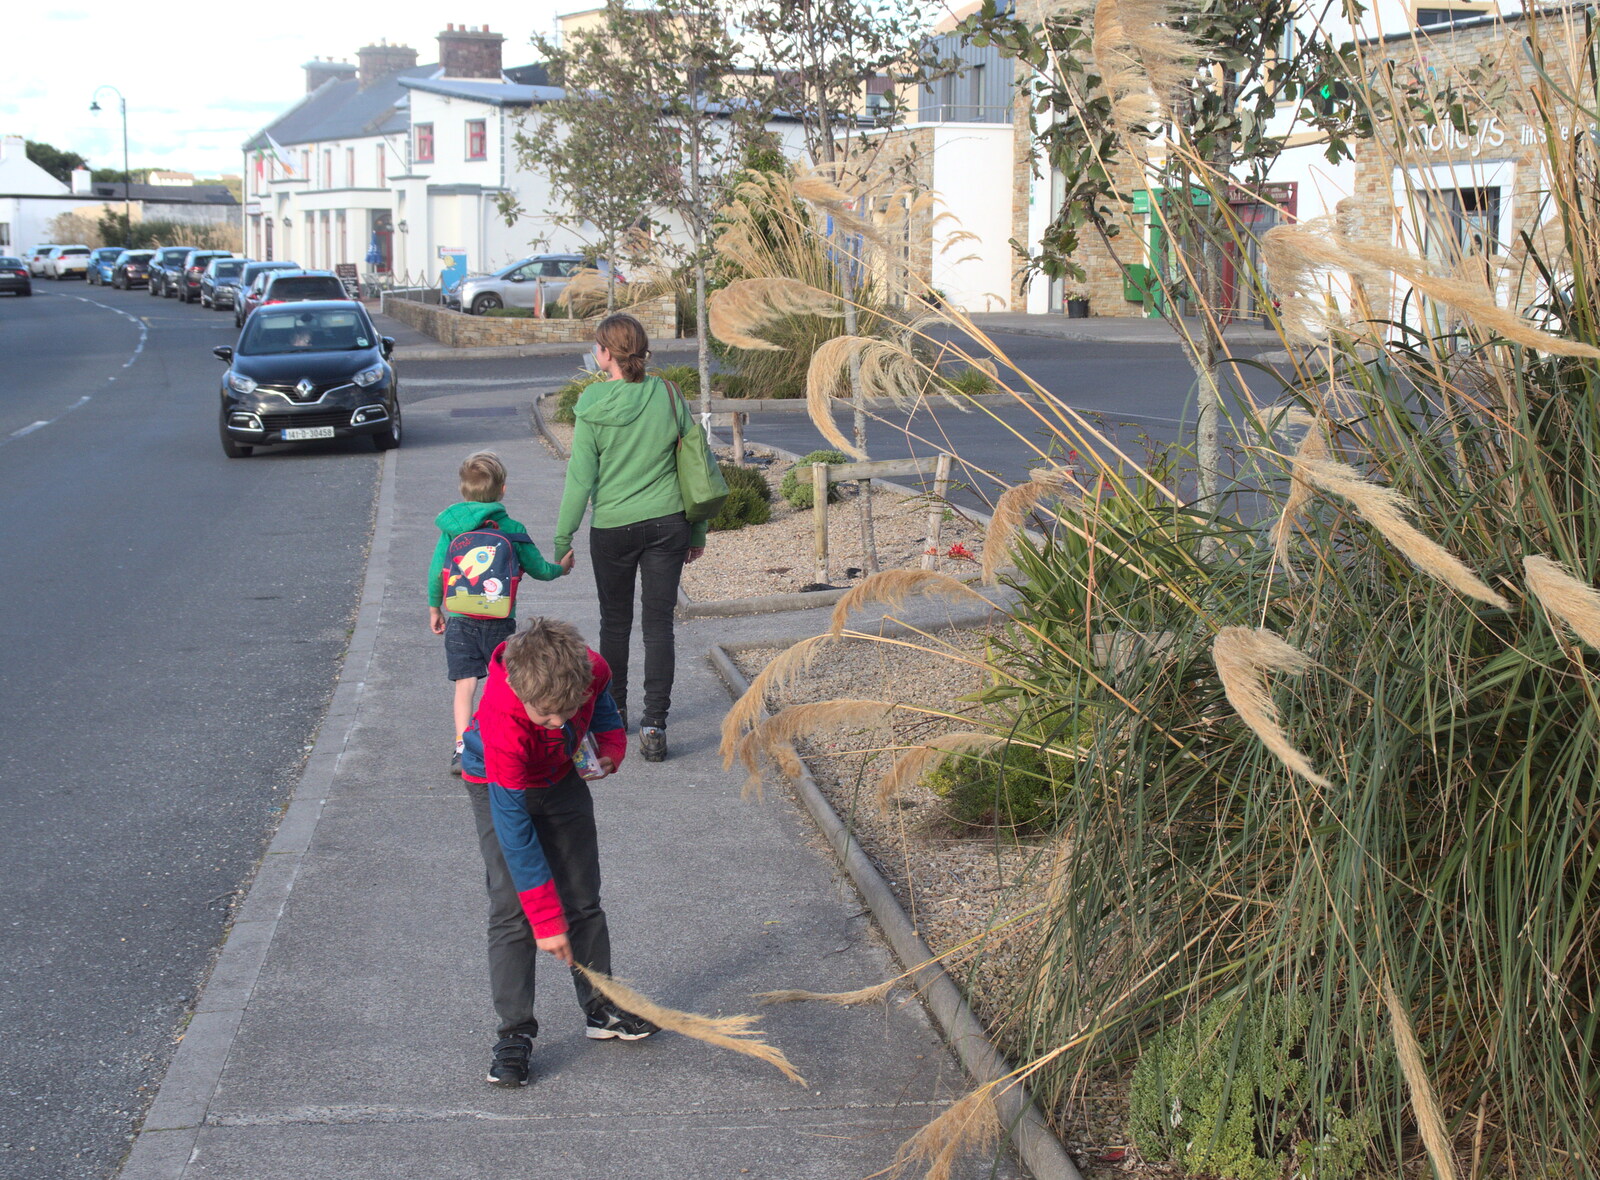 Fred sweeps the pavement with some pampas grass from Surfing Achill Island, Oileán Acla, Maigh Eo, Ireland - 8th August 2017